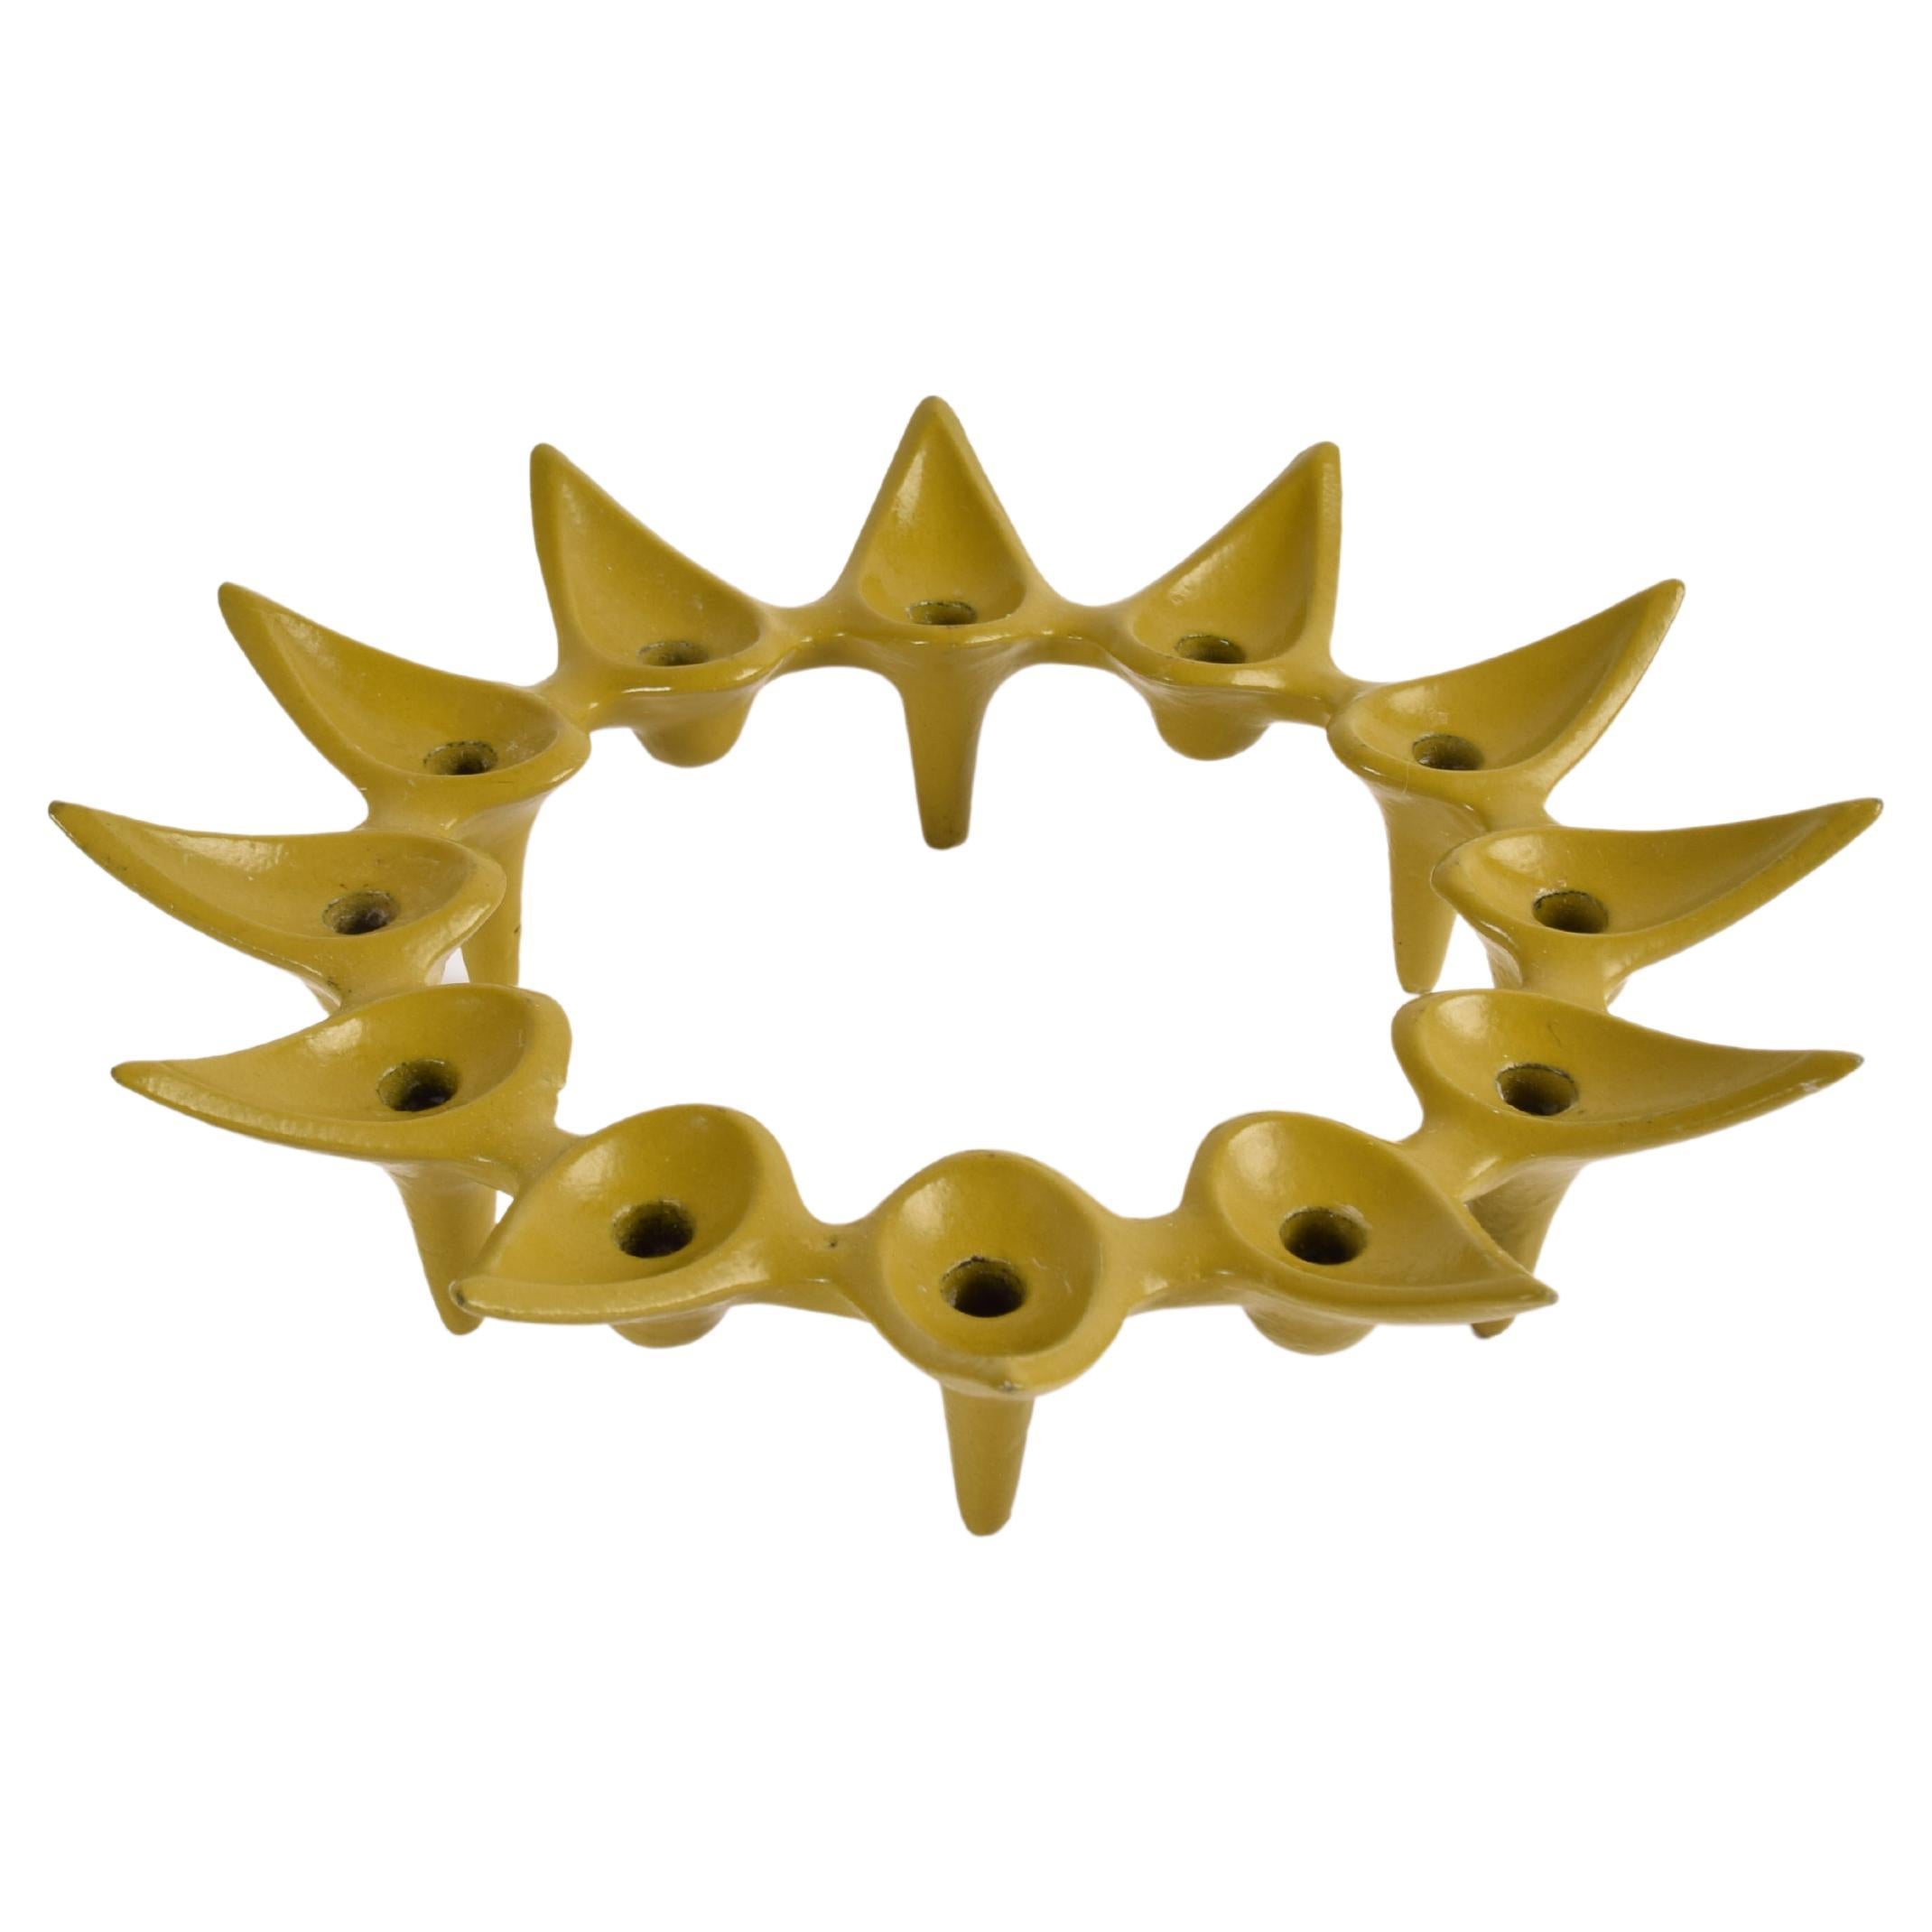 Jens Quistgaard Star Shaped Candle Holder Yellow Green Iron, Danish Modern 1960s For Sale